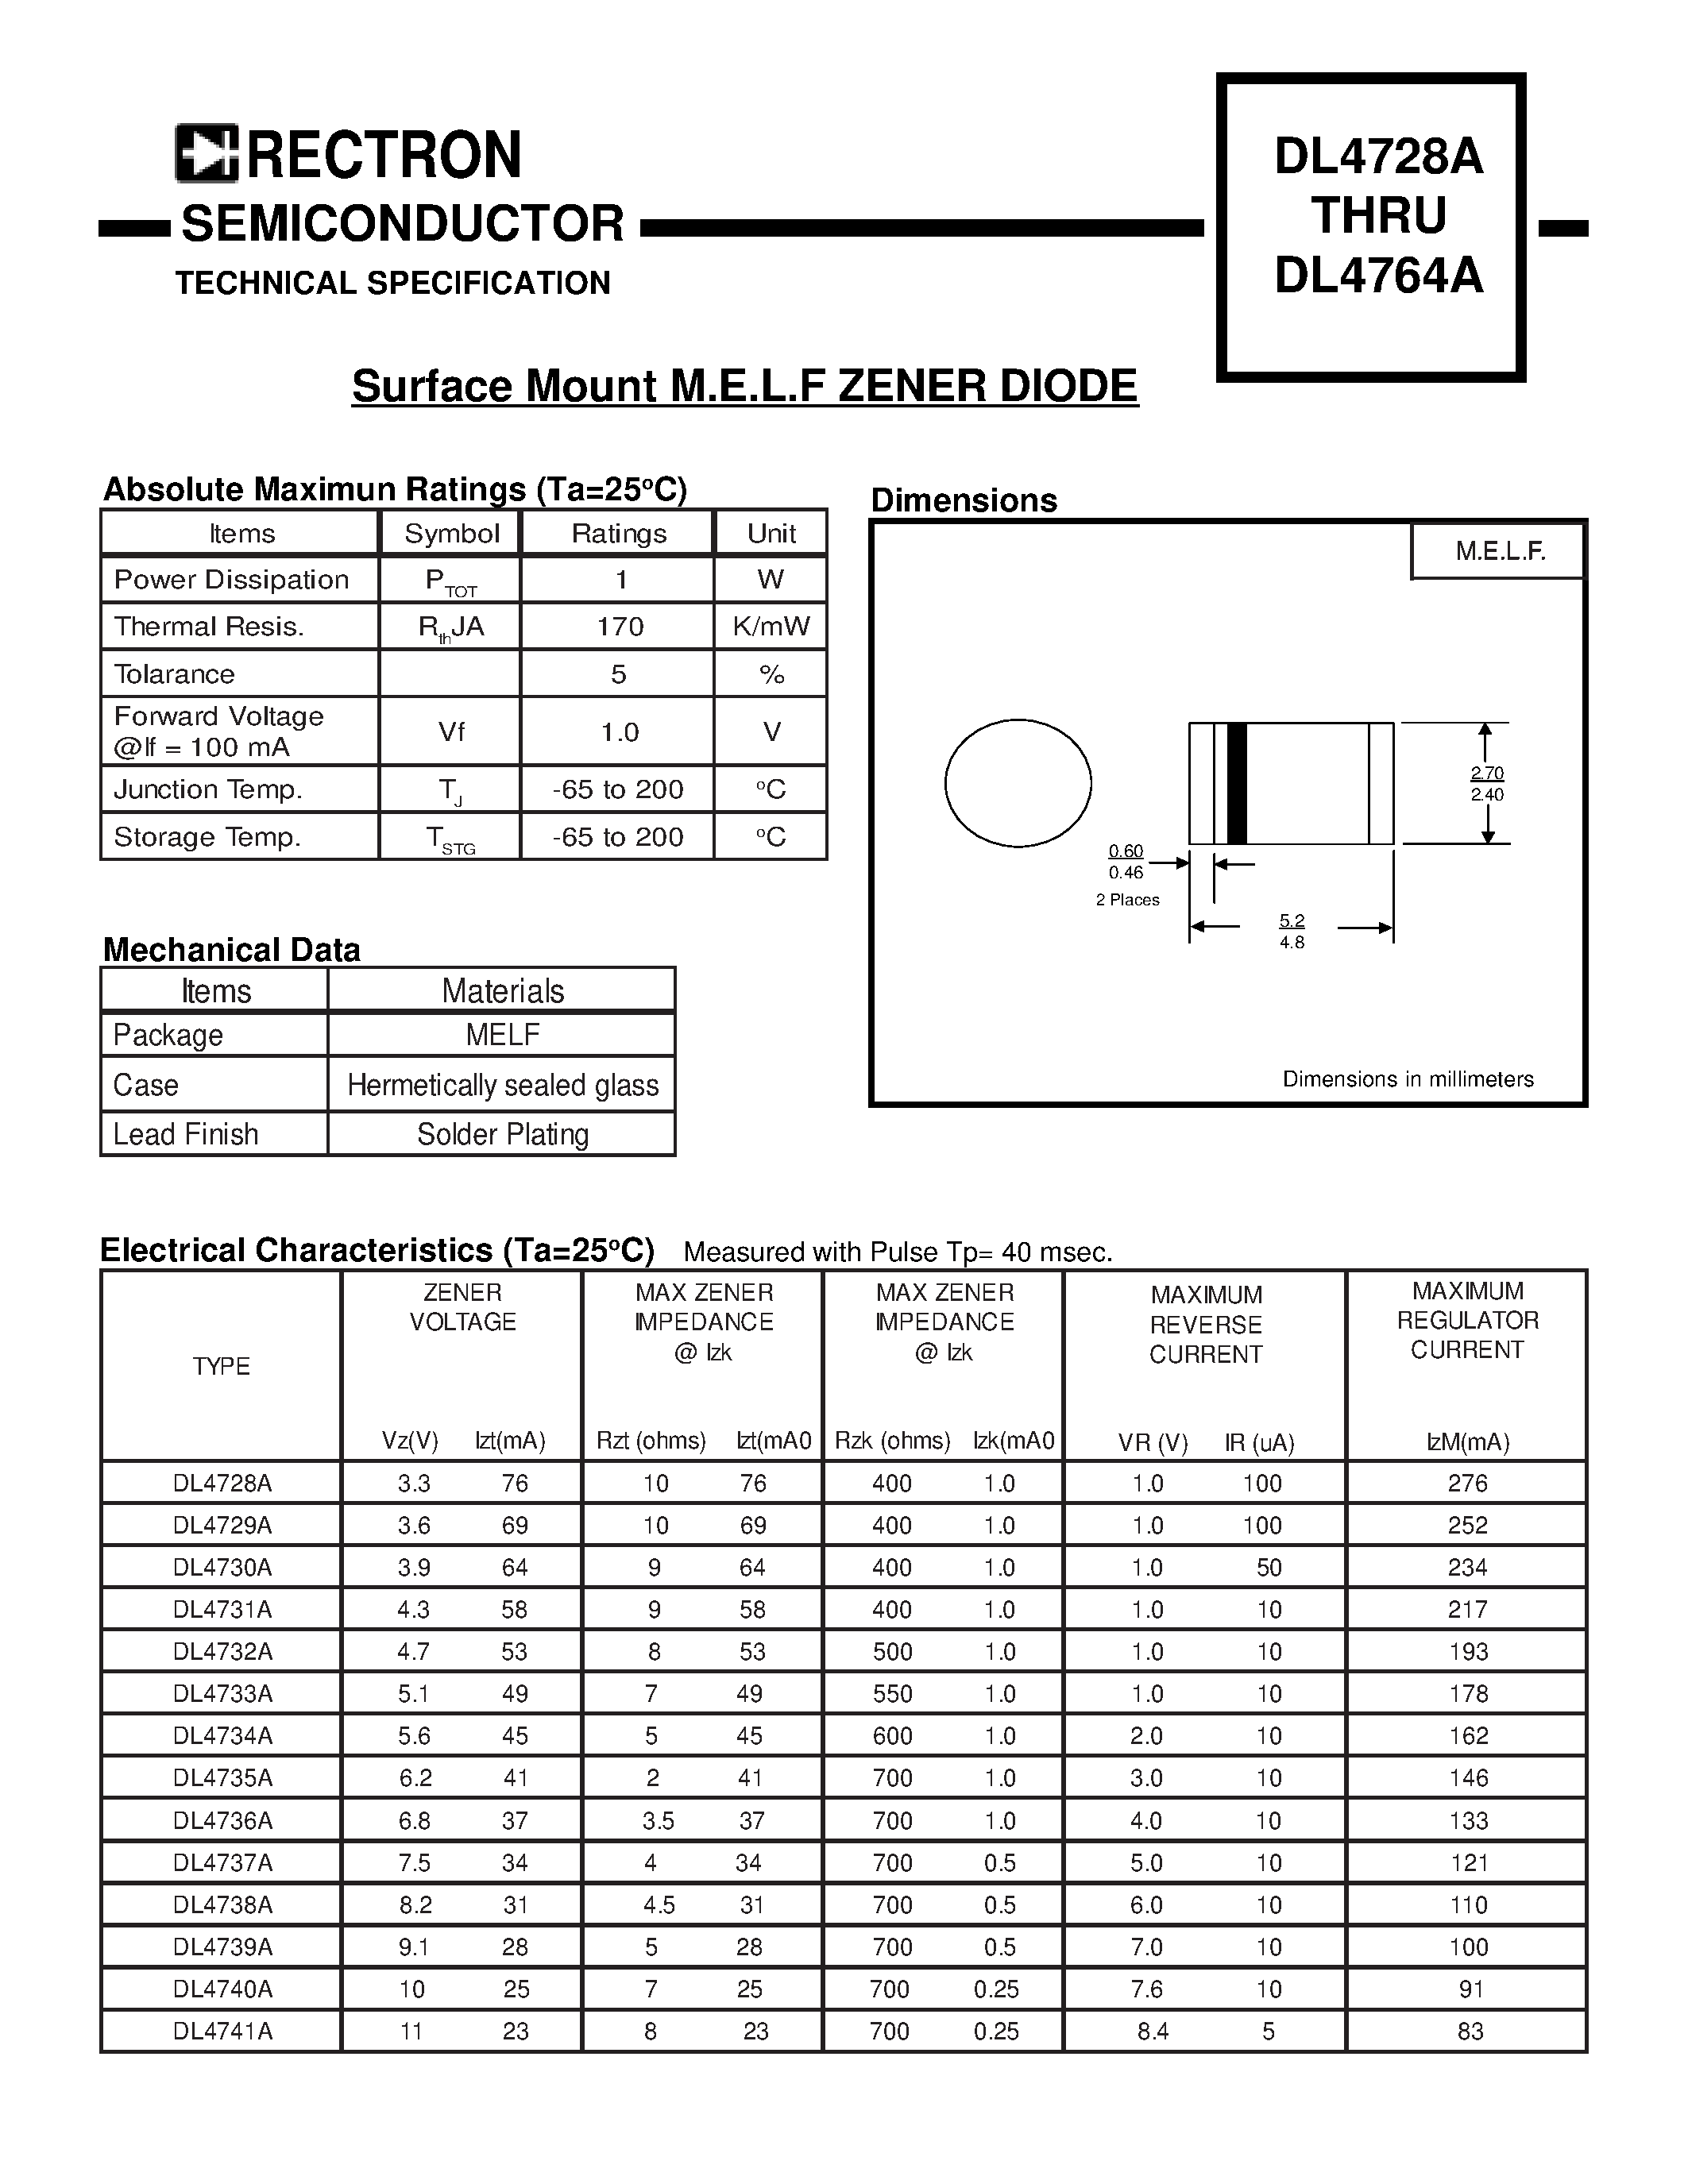 Datasheet DL4737A - Surface Mount M.E.L.F ZENER DIODE page 1